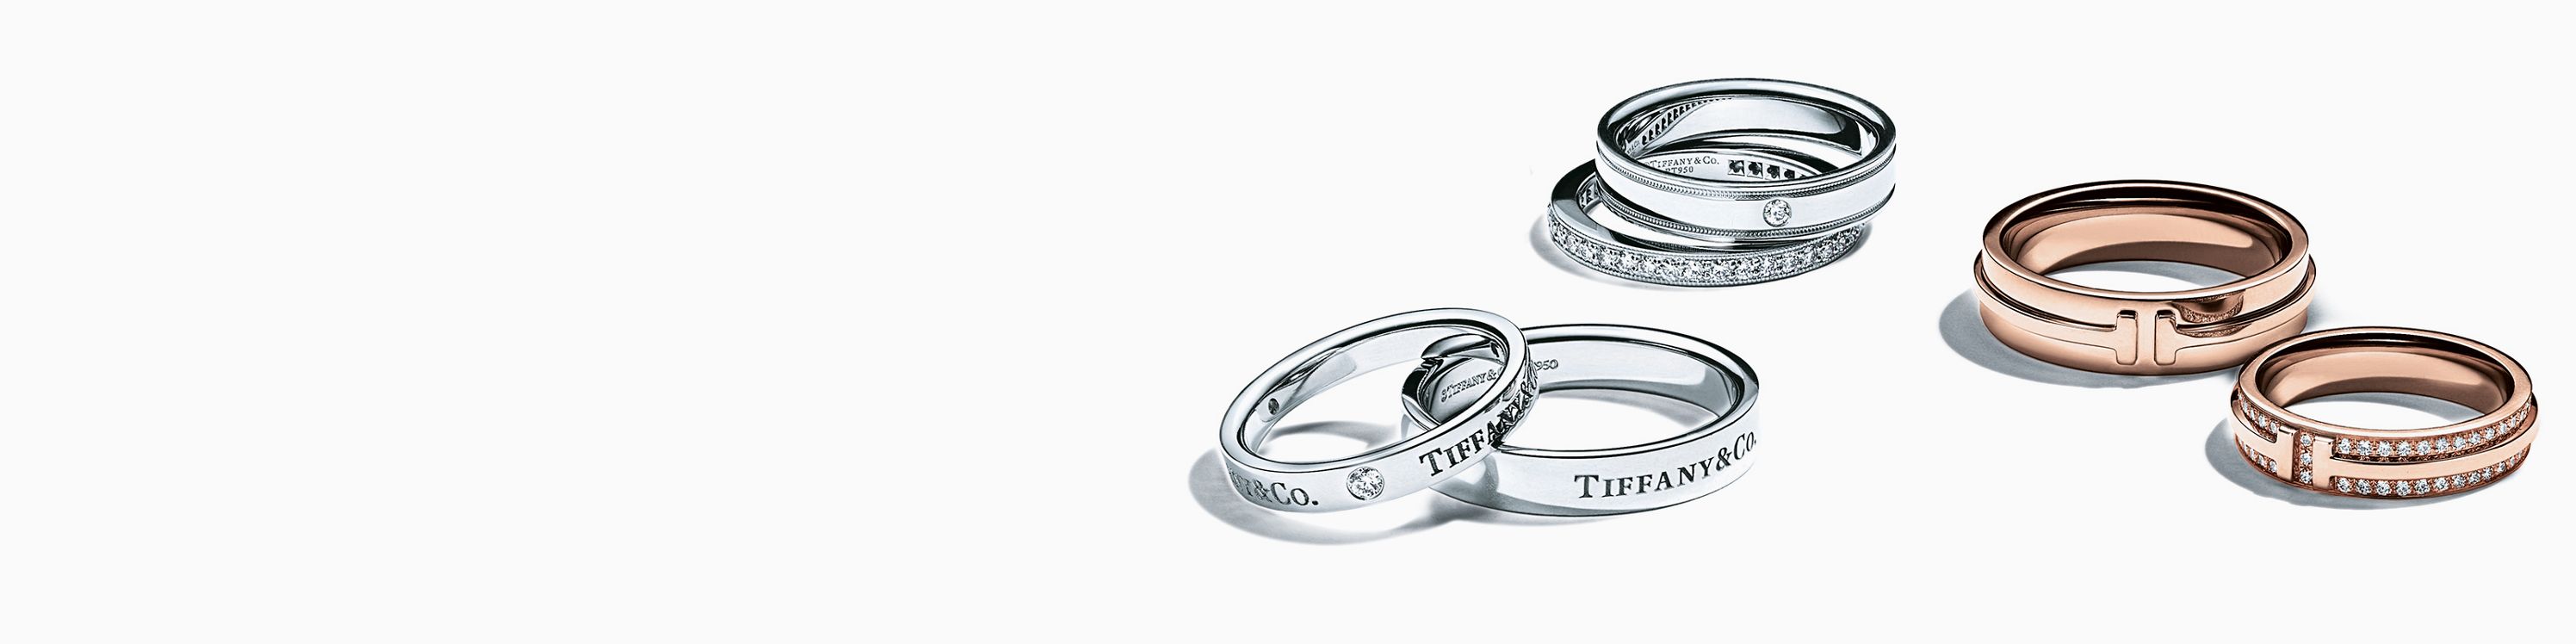 Tiffany & Co. Couples’ Rings 